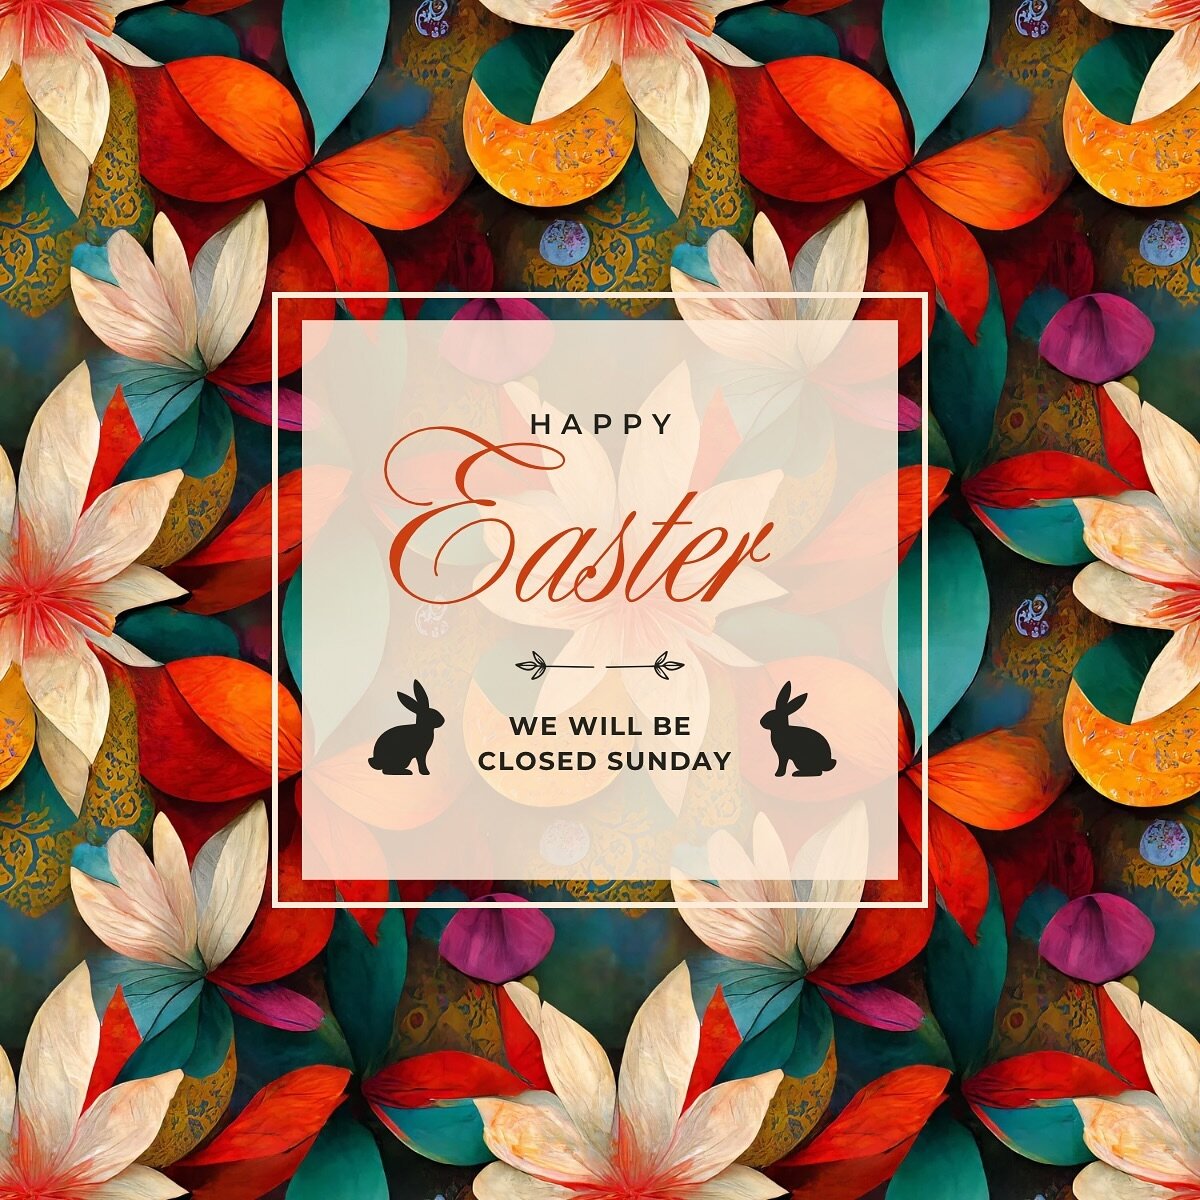 We hope that you enjoy a wonderful Easter with your friends and family. 
We will be closed on Sunday so that our staff can spend time with their families. We will reopen at 10 AM on Monday. We look forward to seeing you stop in and Spin For Your Sale